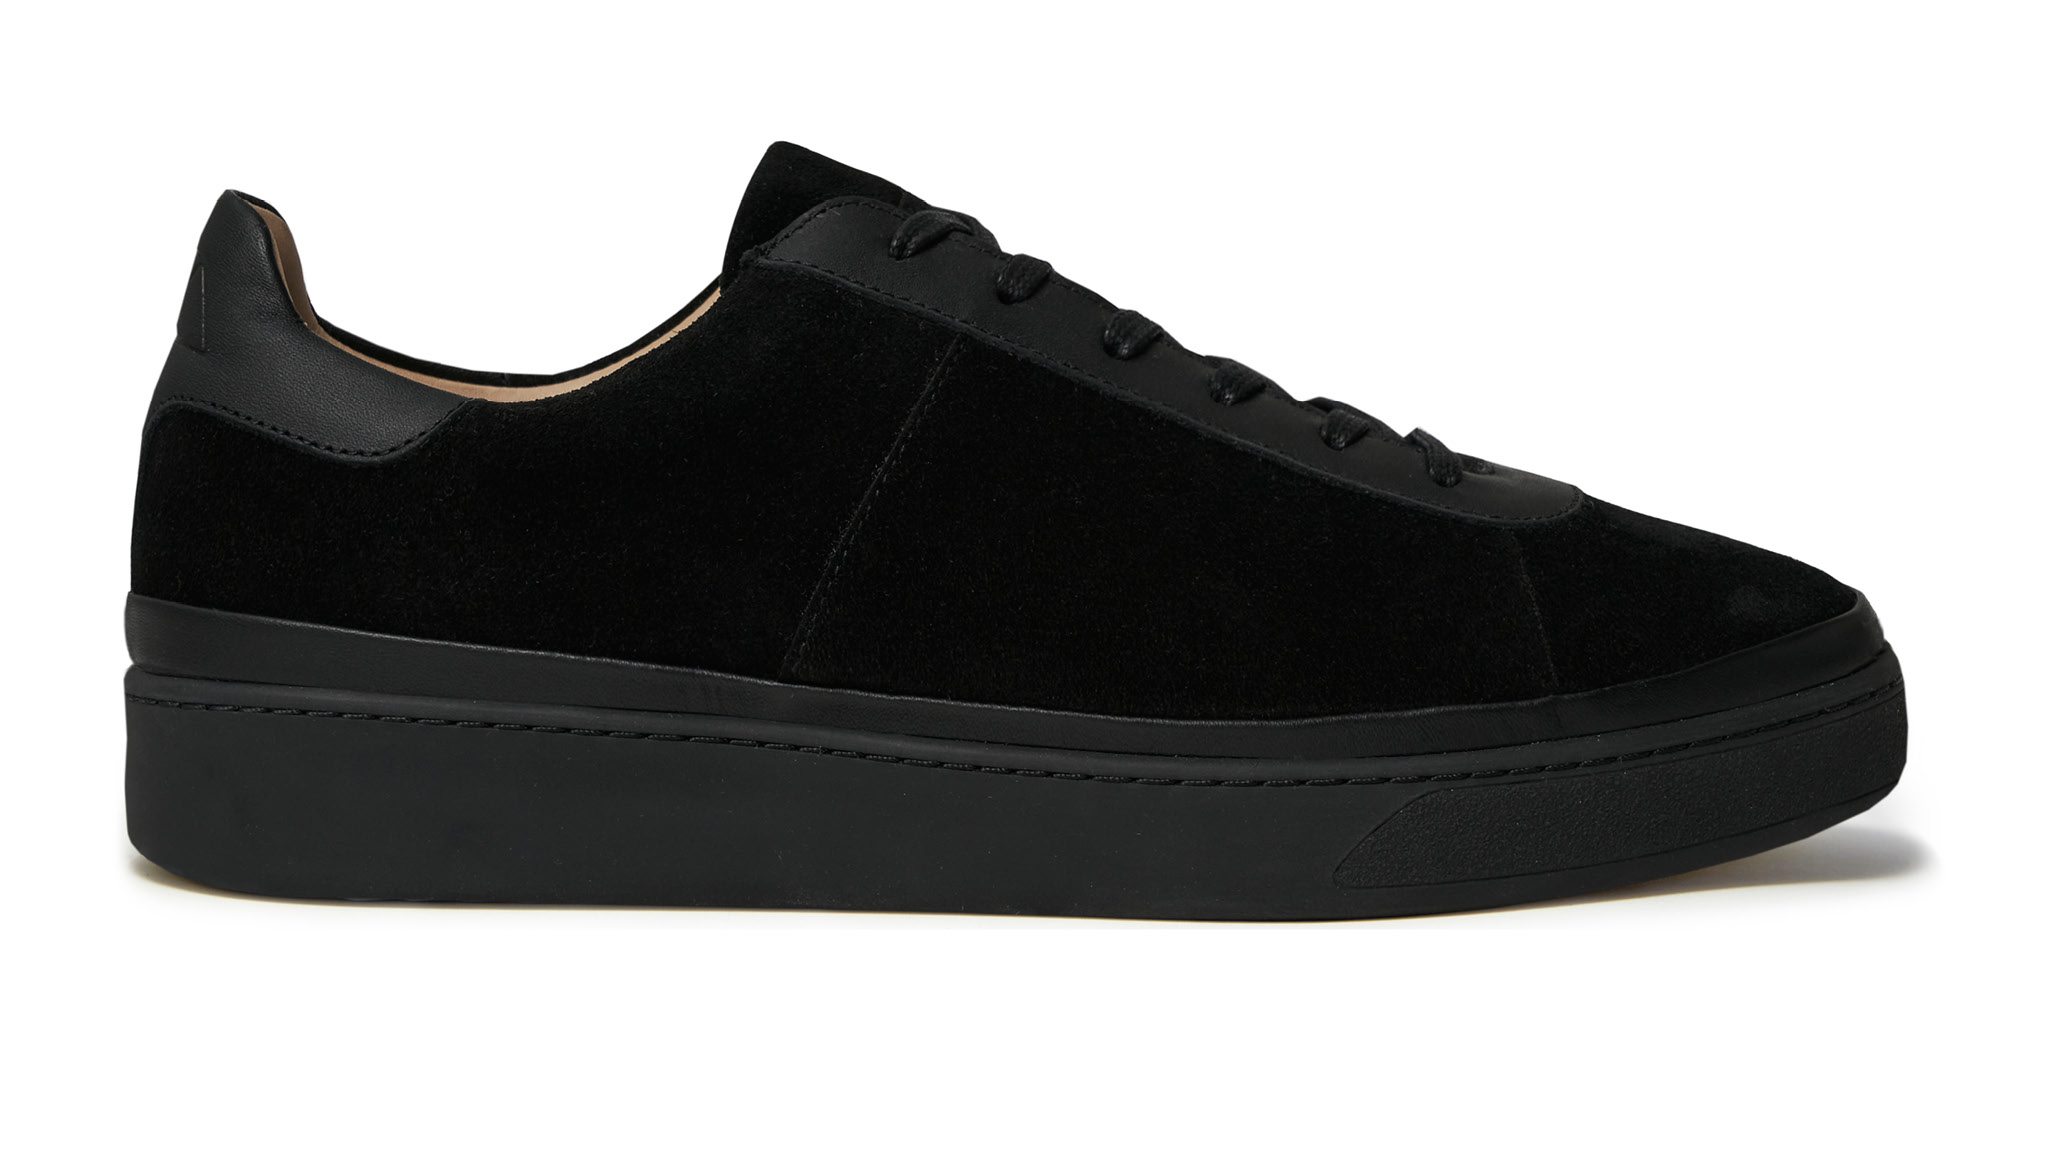 Lace-Up Black Sneakers for Men in Suede